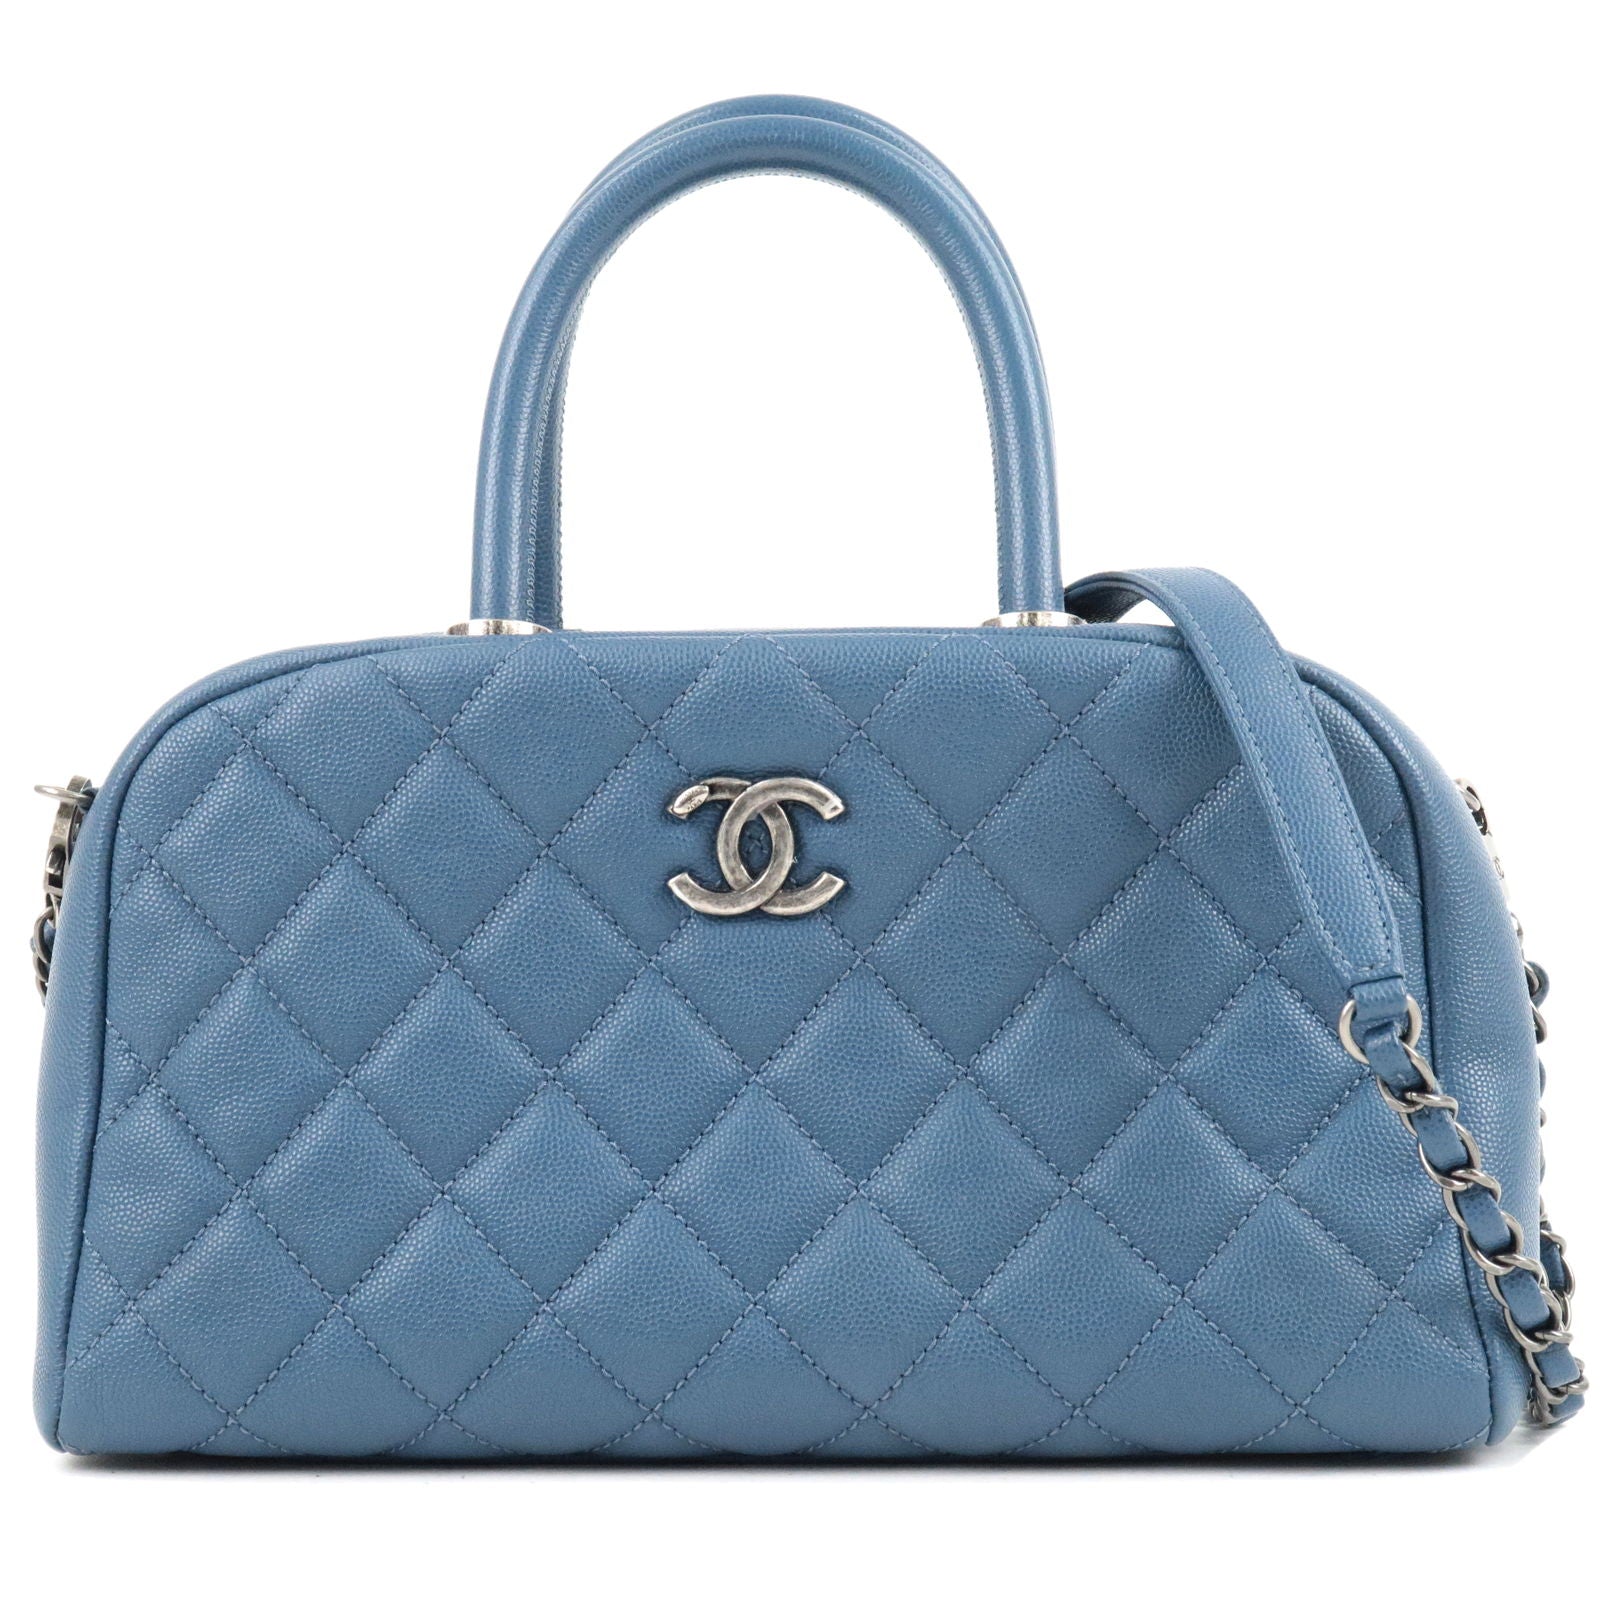 teal chanel purse